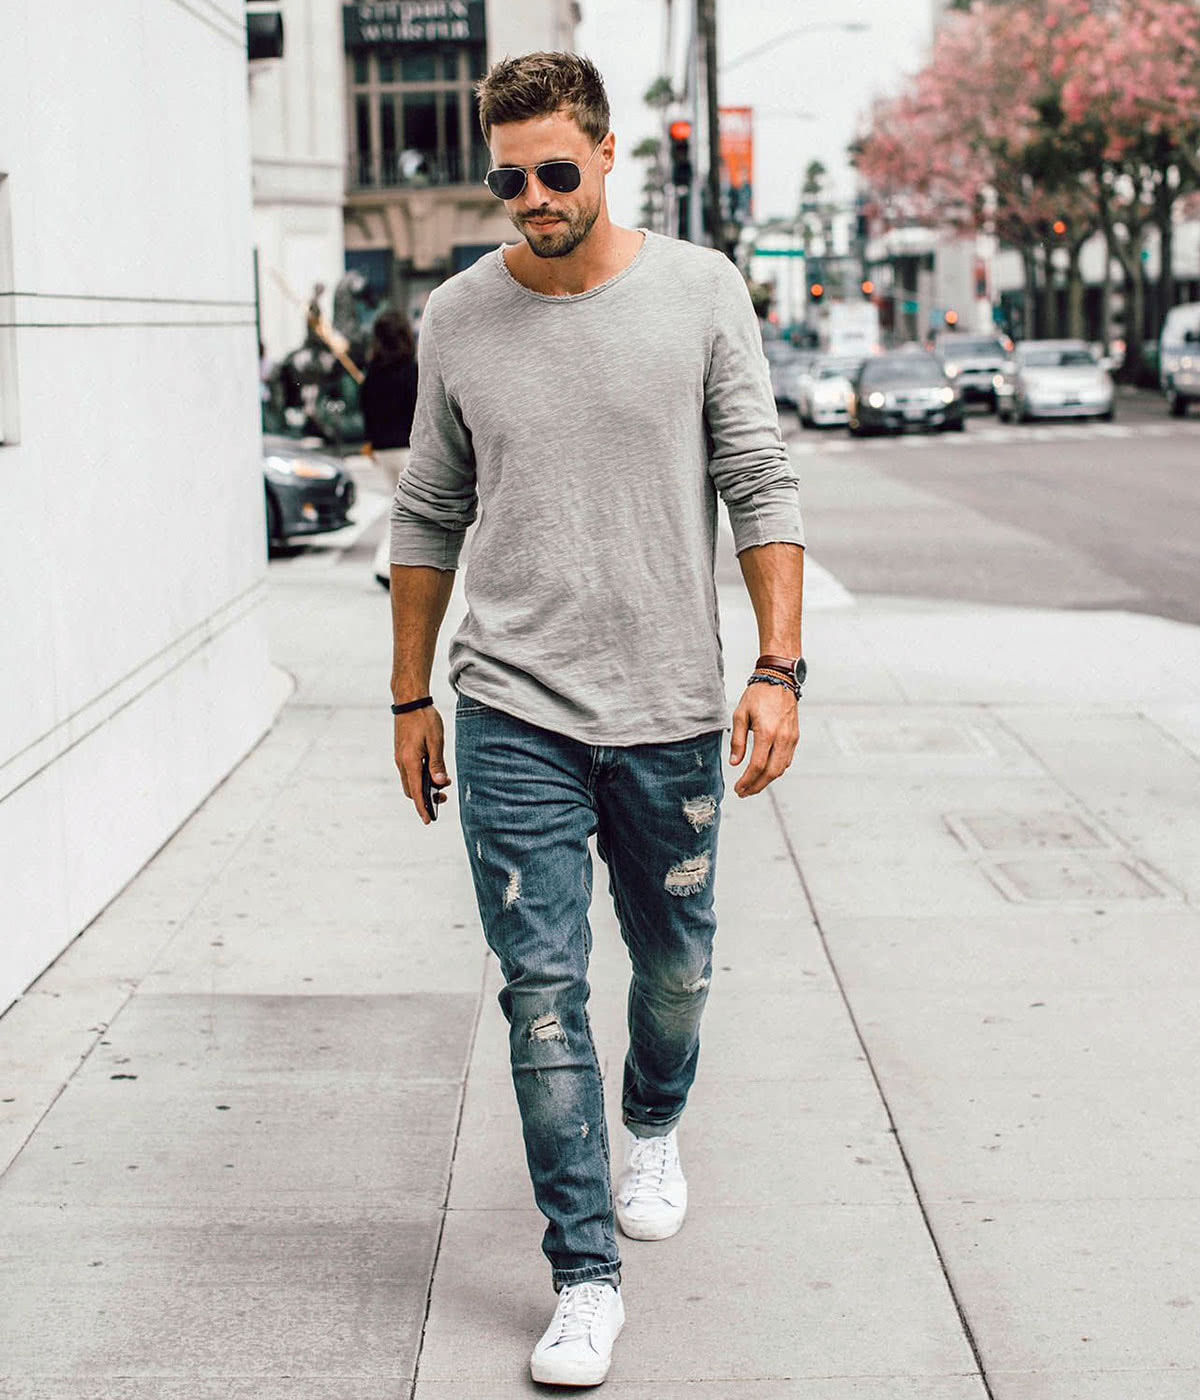 Casual Style Guide For Men: 7 Pro Tips To Look Great (2020 Updated)